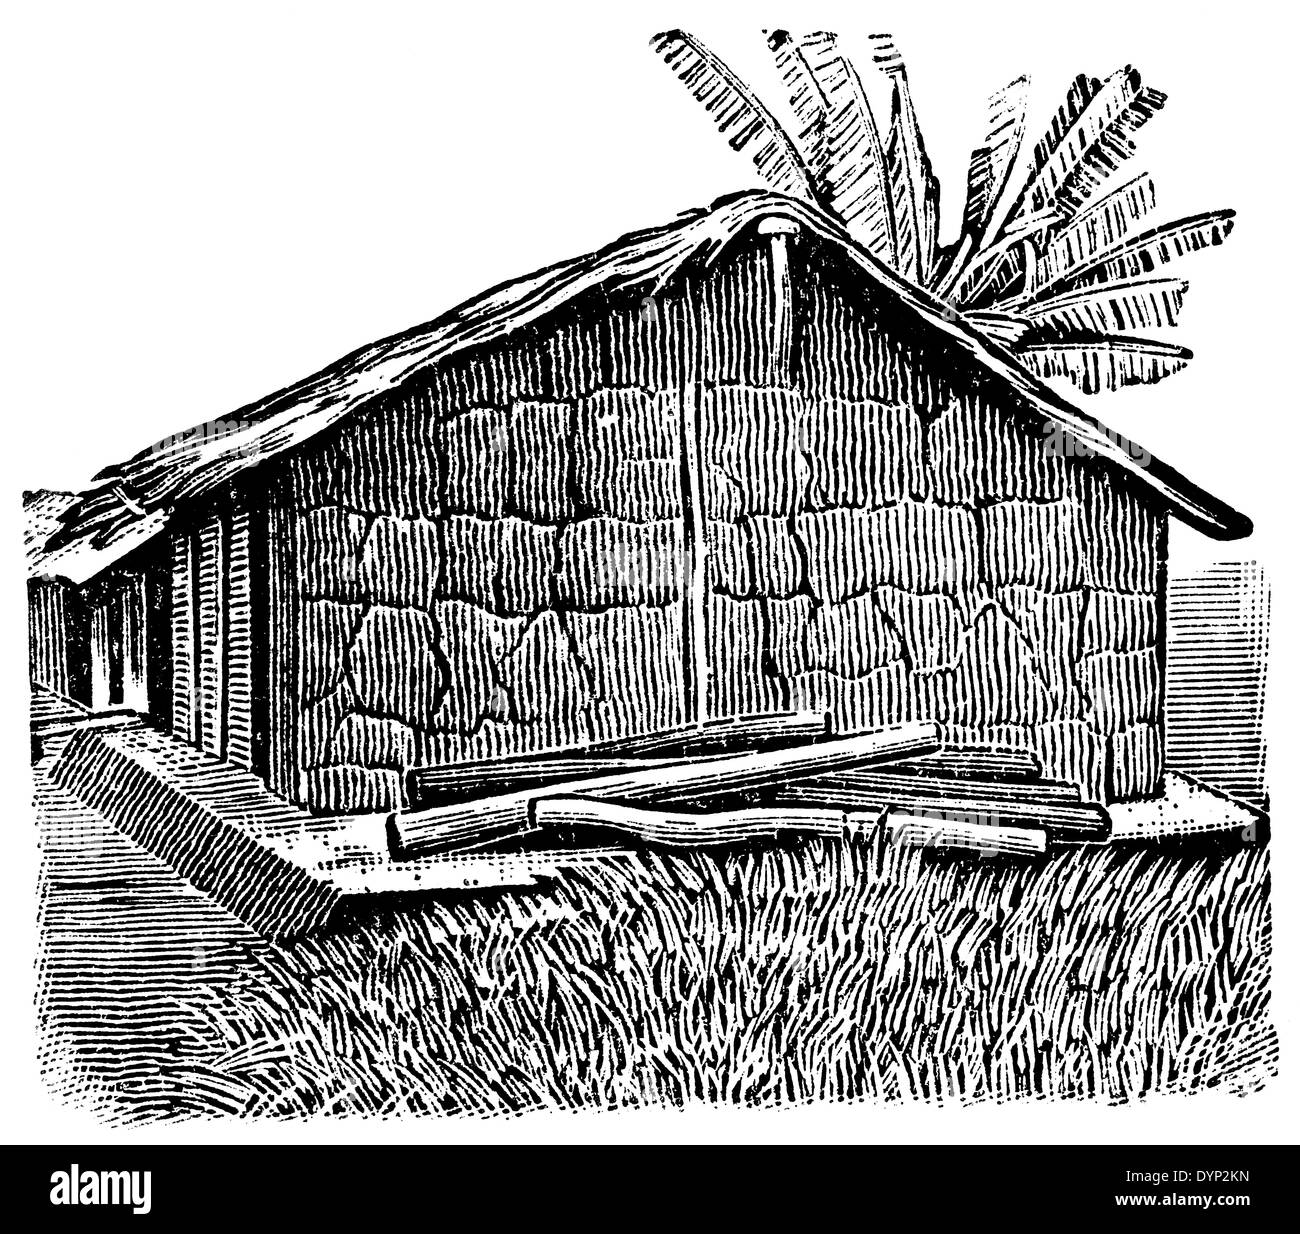 West African traditional rural house, illustration from Soviet encyclopedia, 1926 Stock Photo